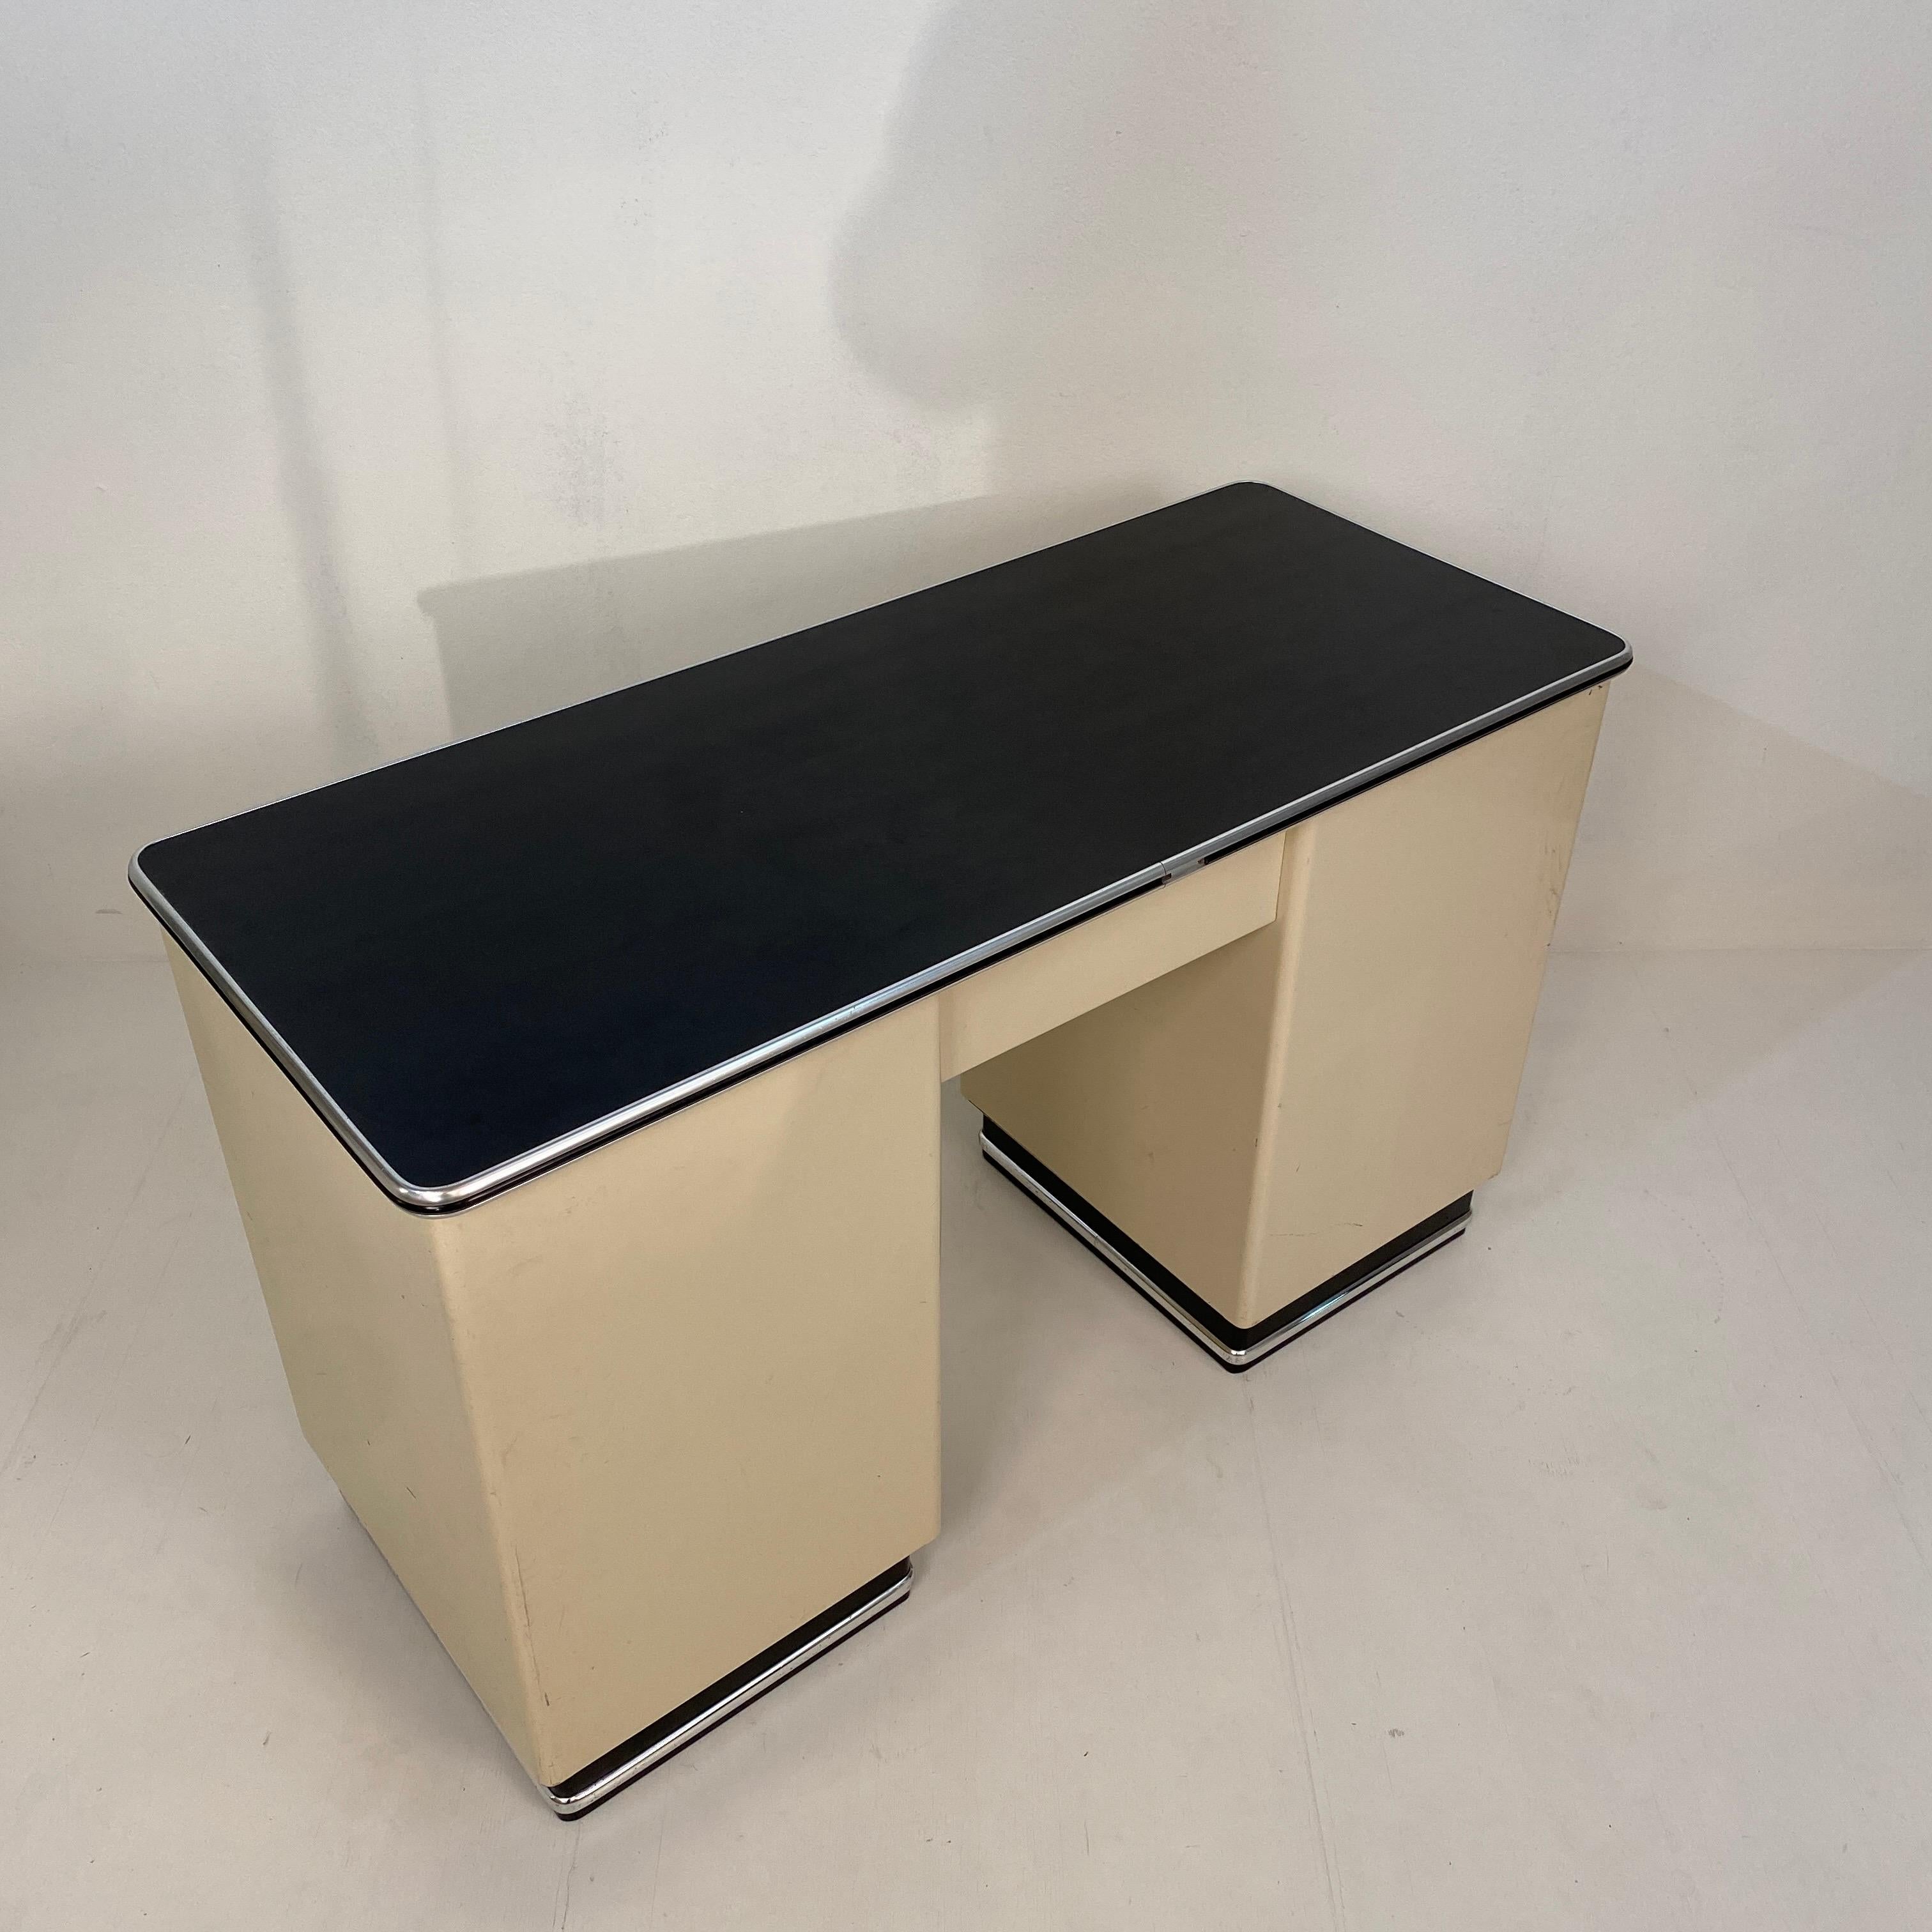 1930s German Bauhaus Desk Out of White Lacquered Metal and a Black Linoleum Top 14